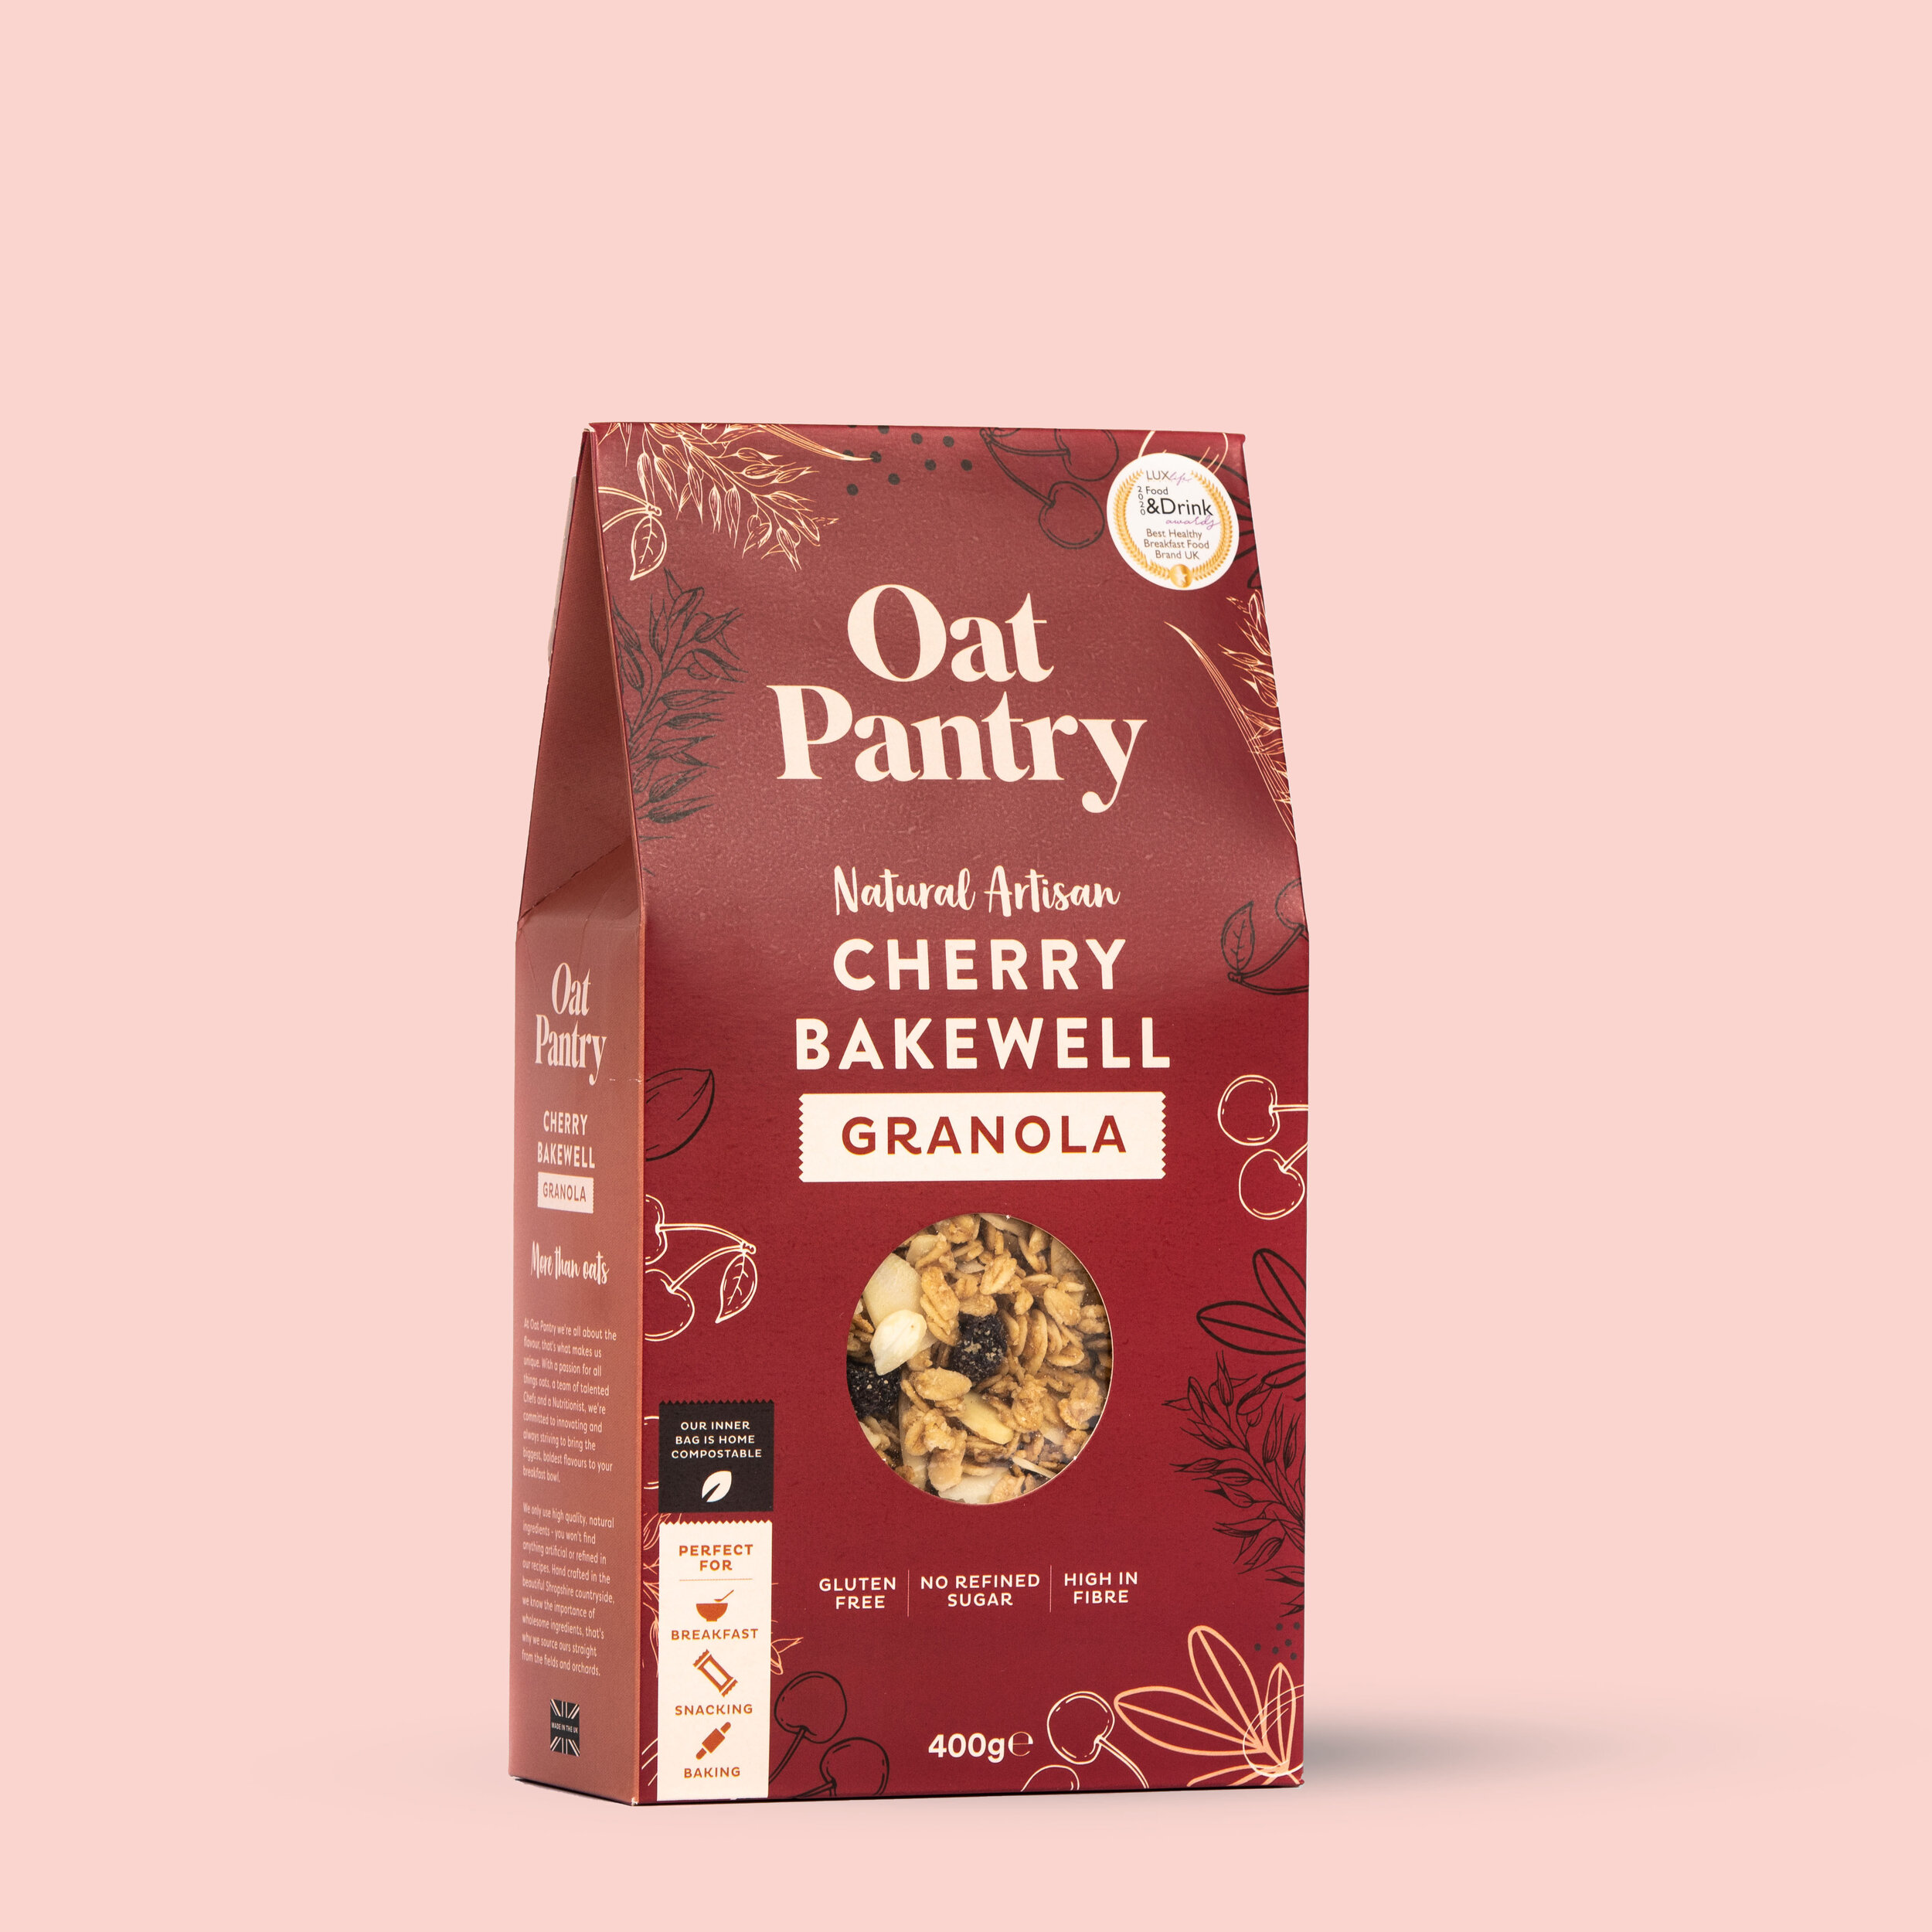 Freelance-graphic-designer-A maroon flat-pouch of Oat Pantry granola